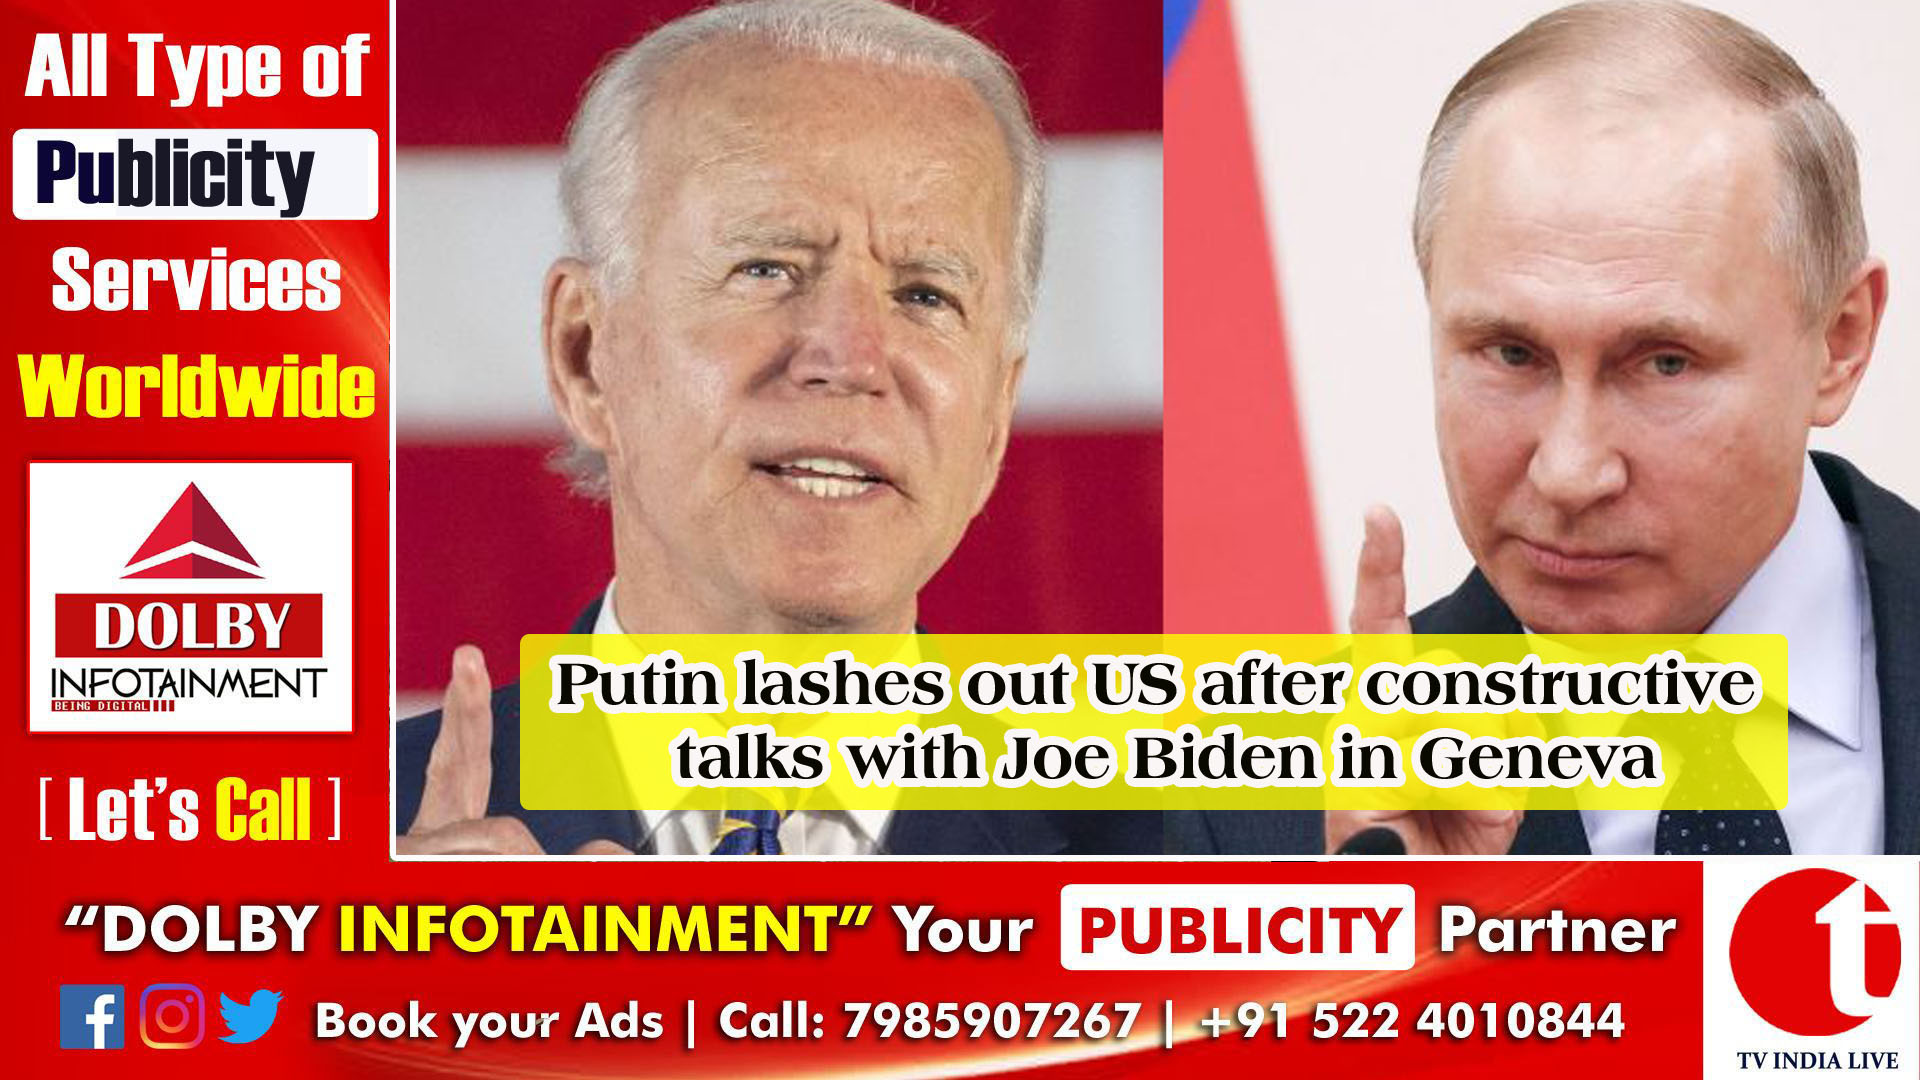 Putin lashes out US after constructive talks with Joe Biden in Geneva